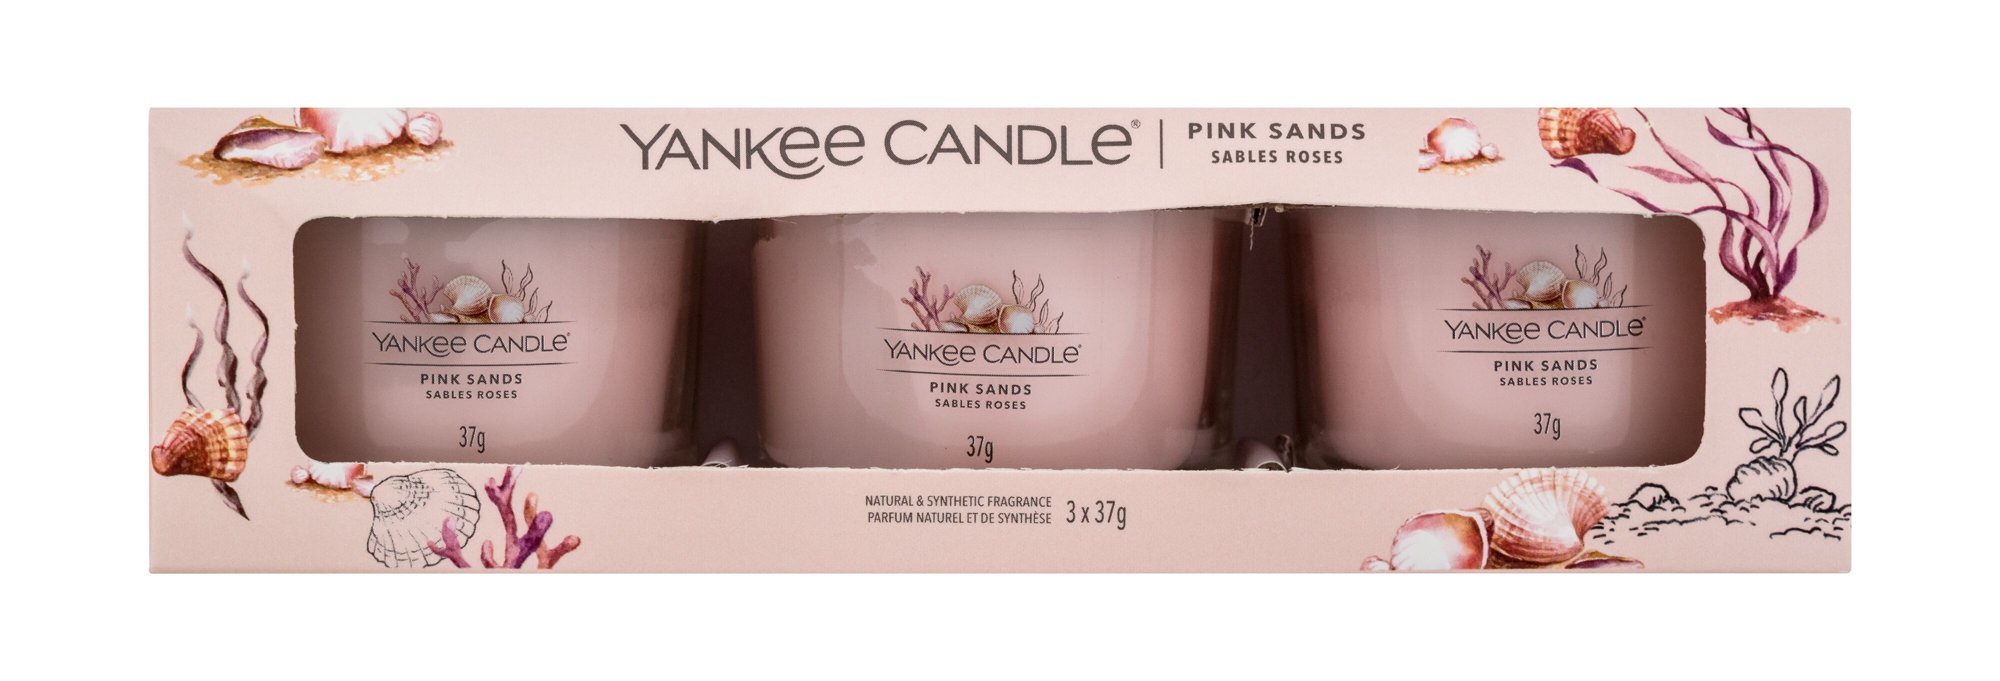 Yankee Candle Pink Sands 37g Scented Candle 3 x 37 g Kvepalai Unisex Scented Candle Rinkinys (Pažeista pakuotė)